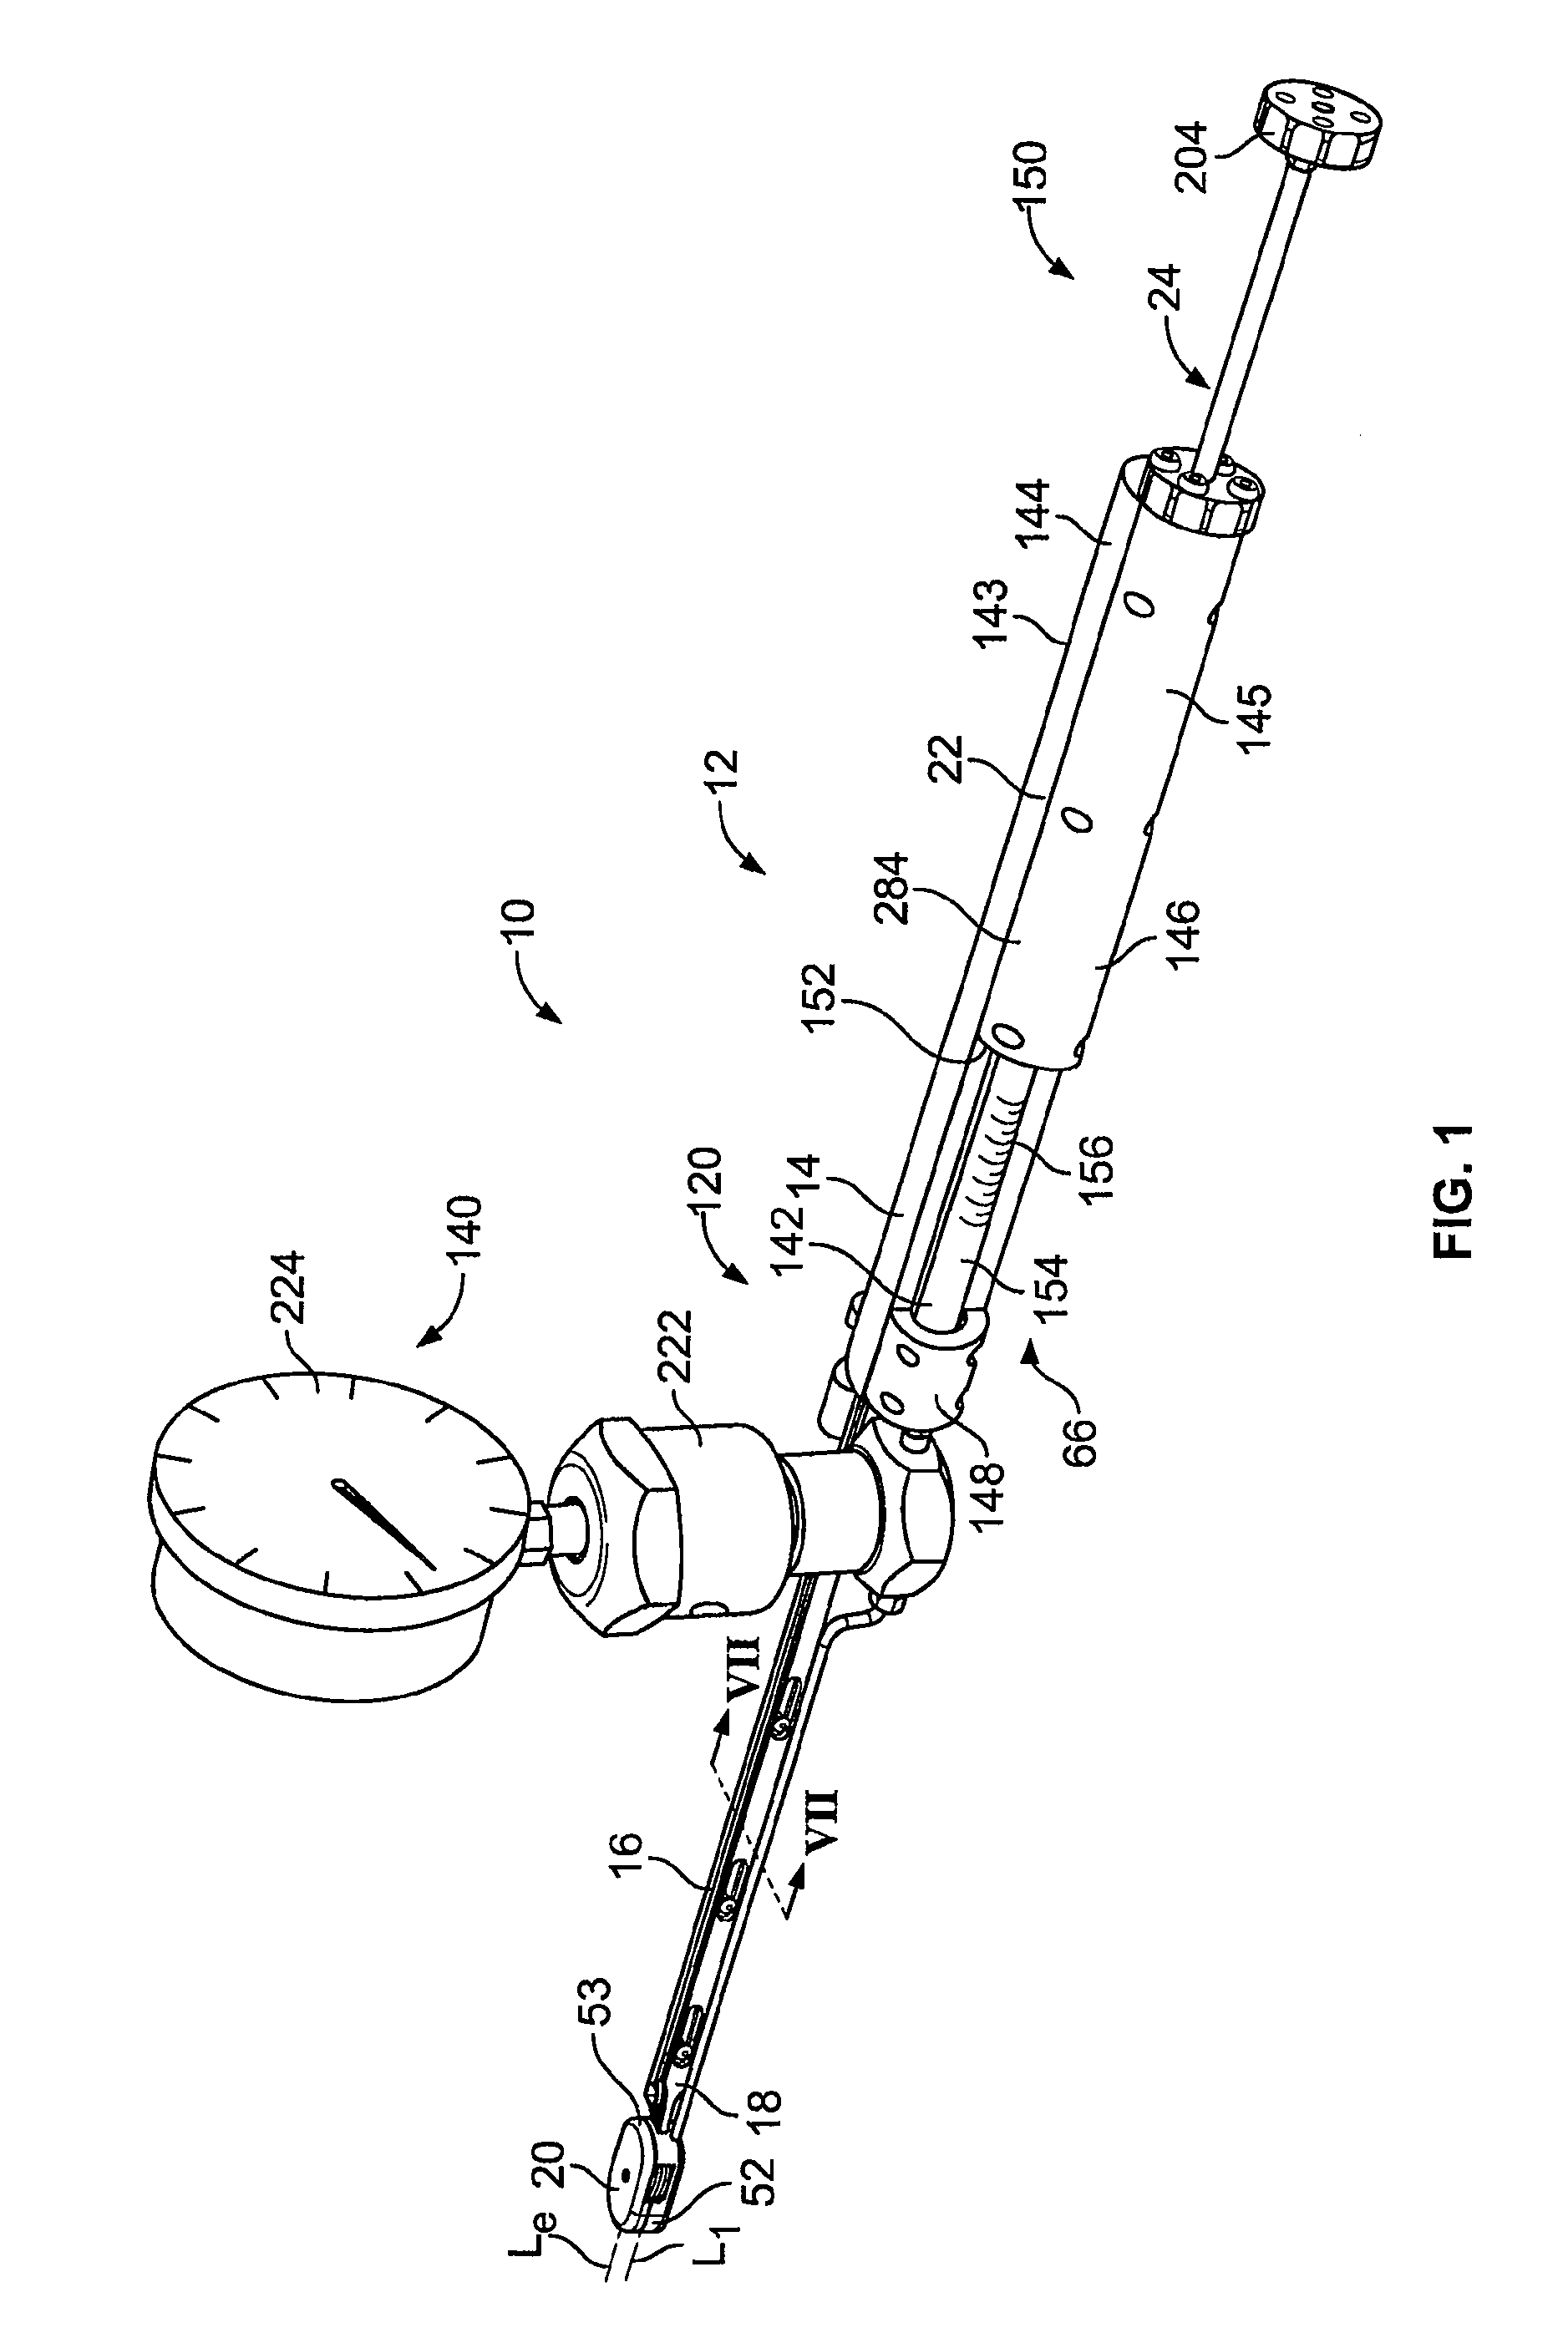 Intervertebral disc space sizing tools and methods